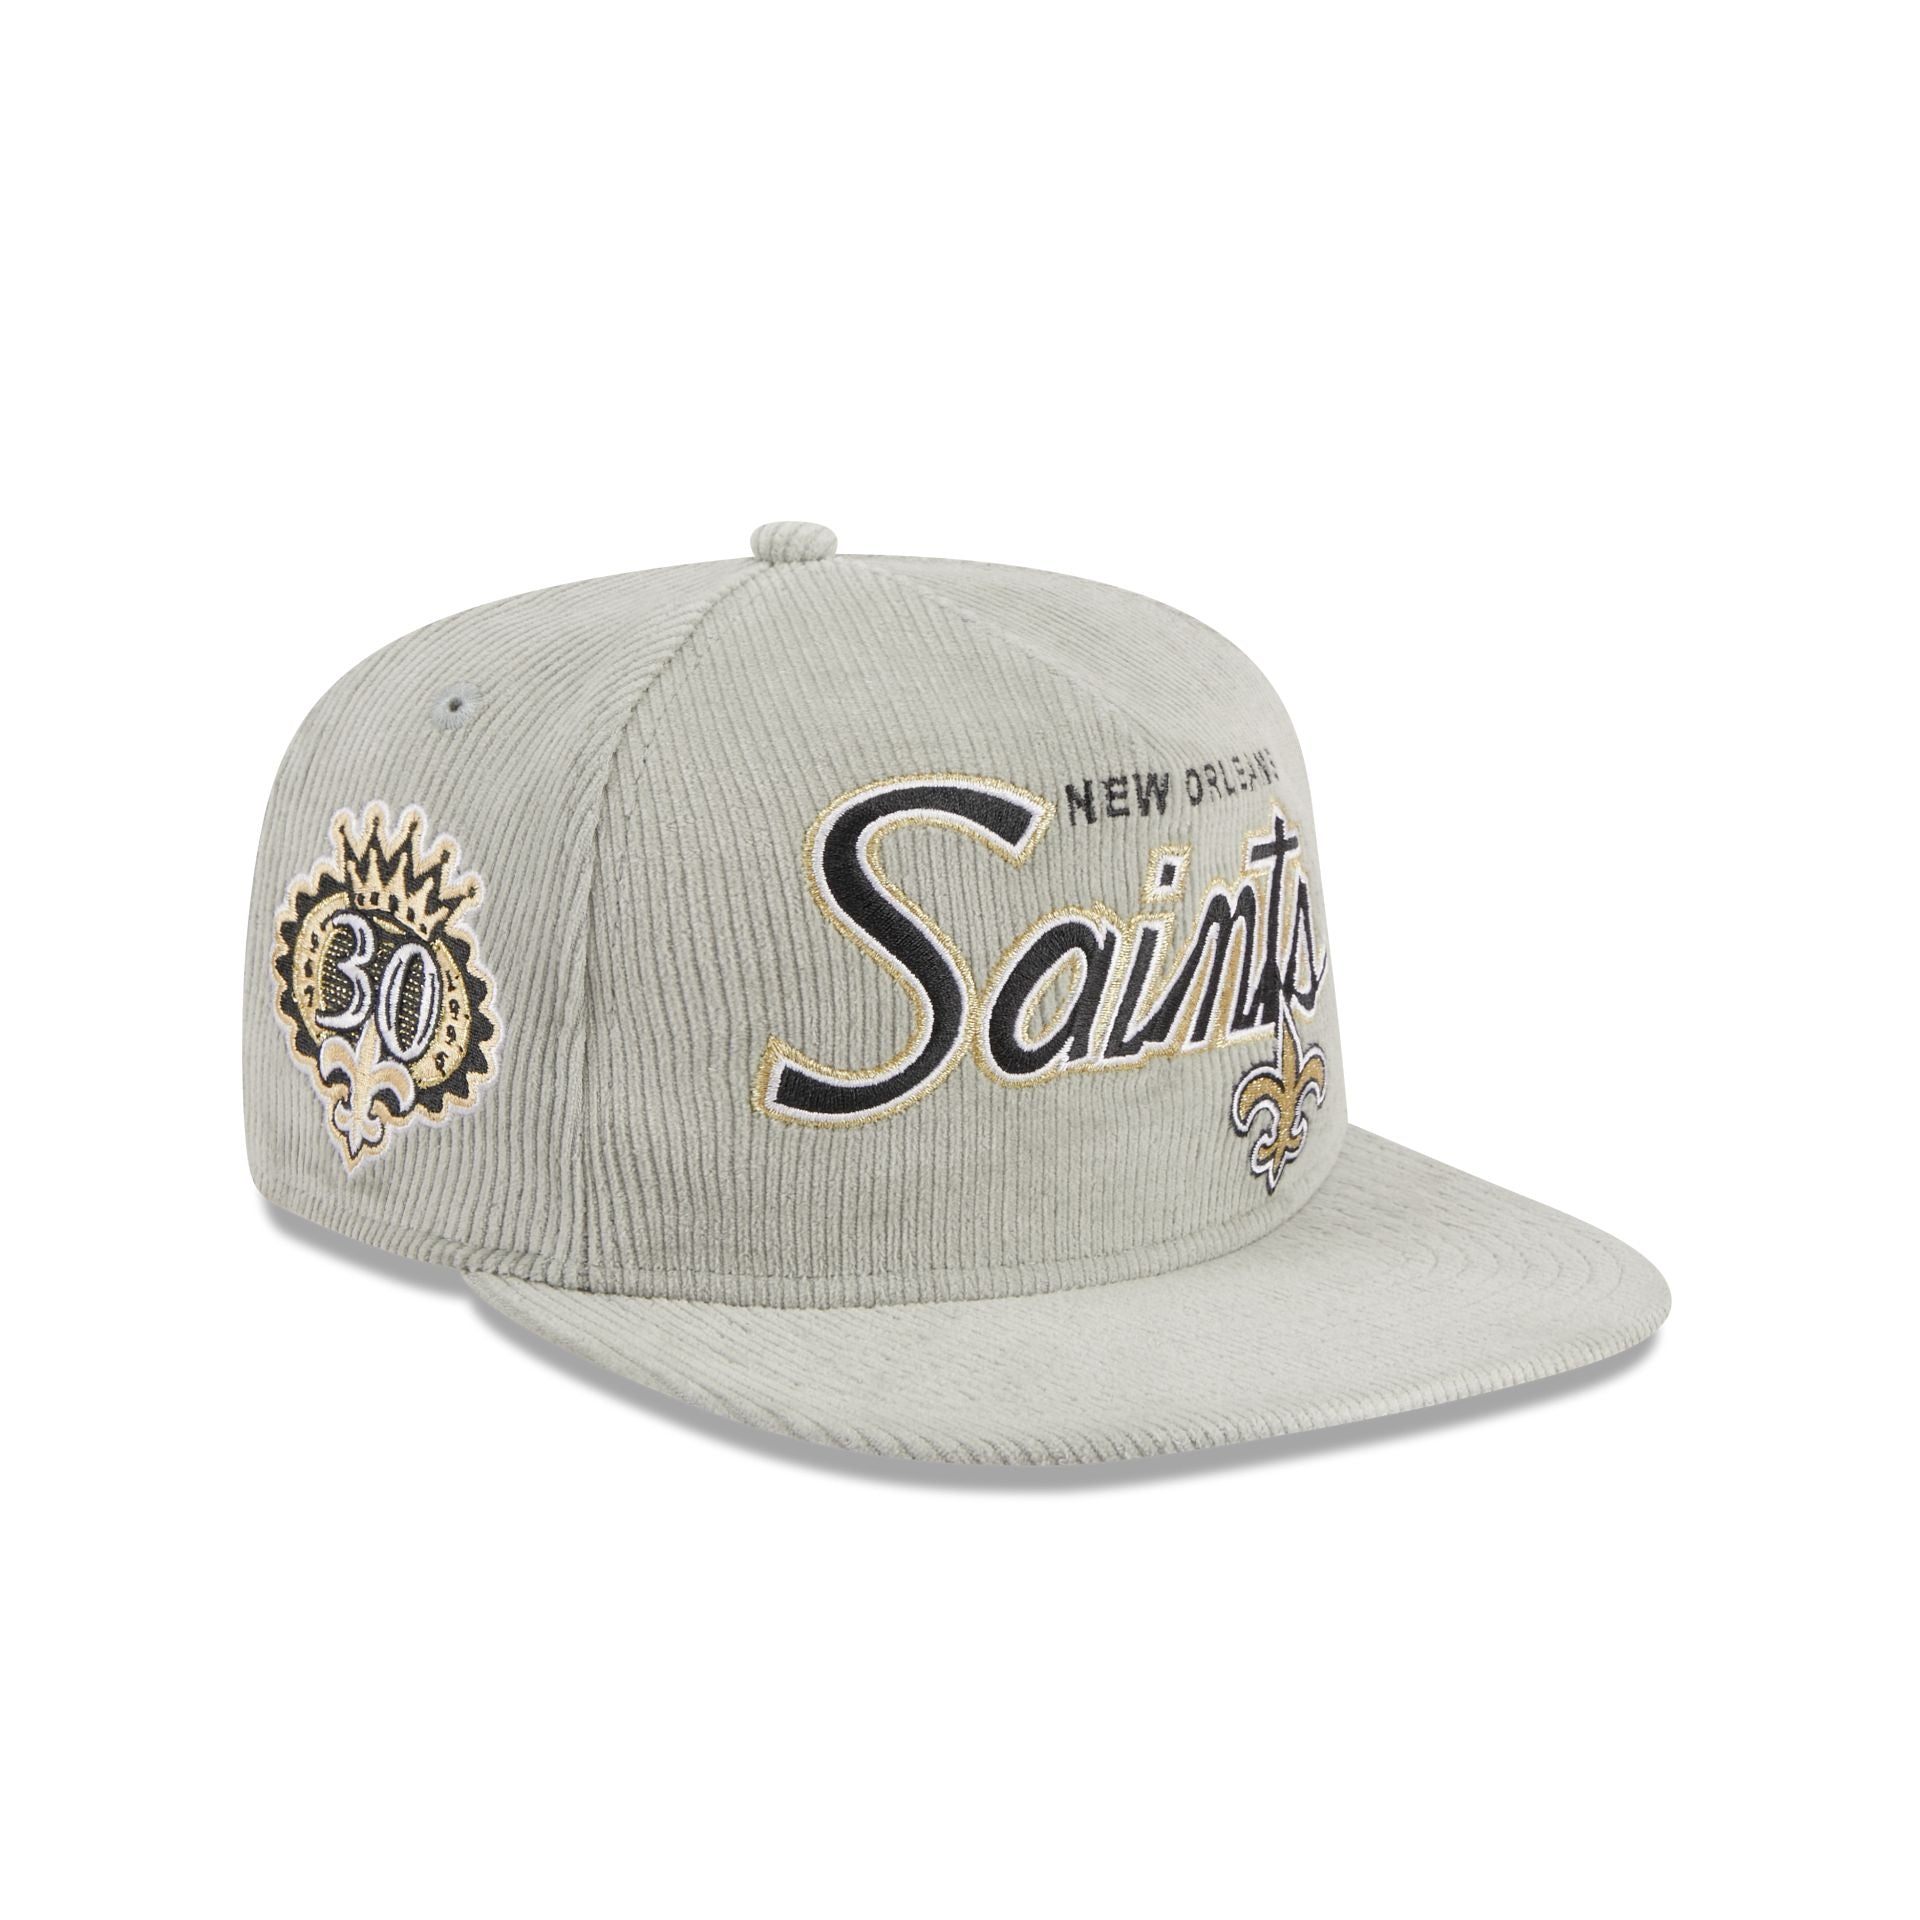 New Orleans Saints Throwback Golfer Hat, Gray, by New Era